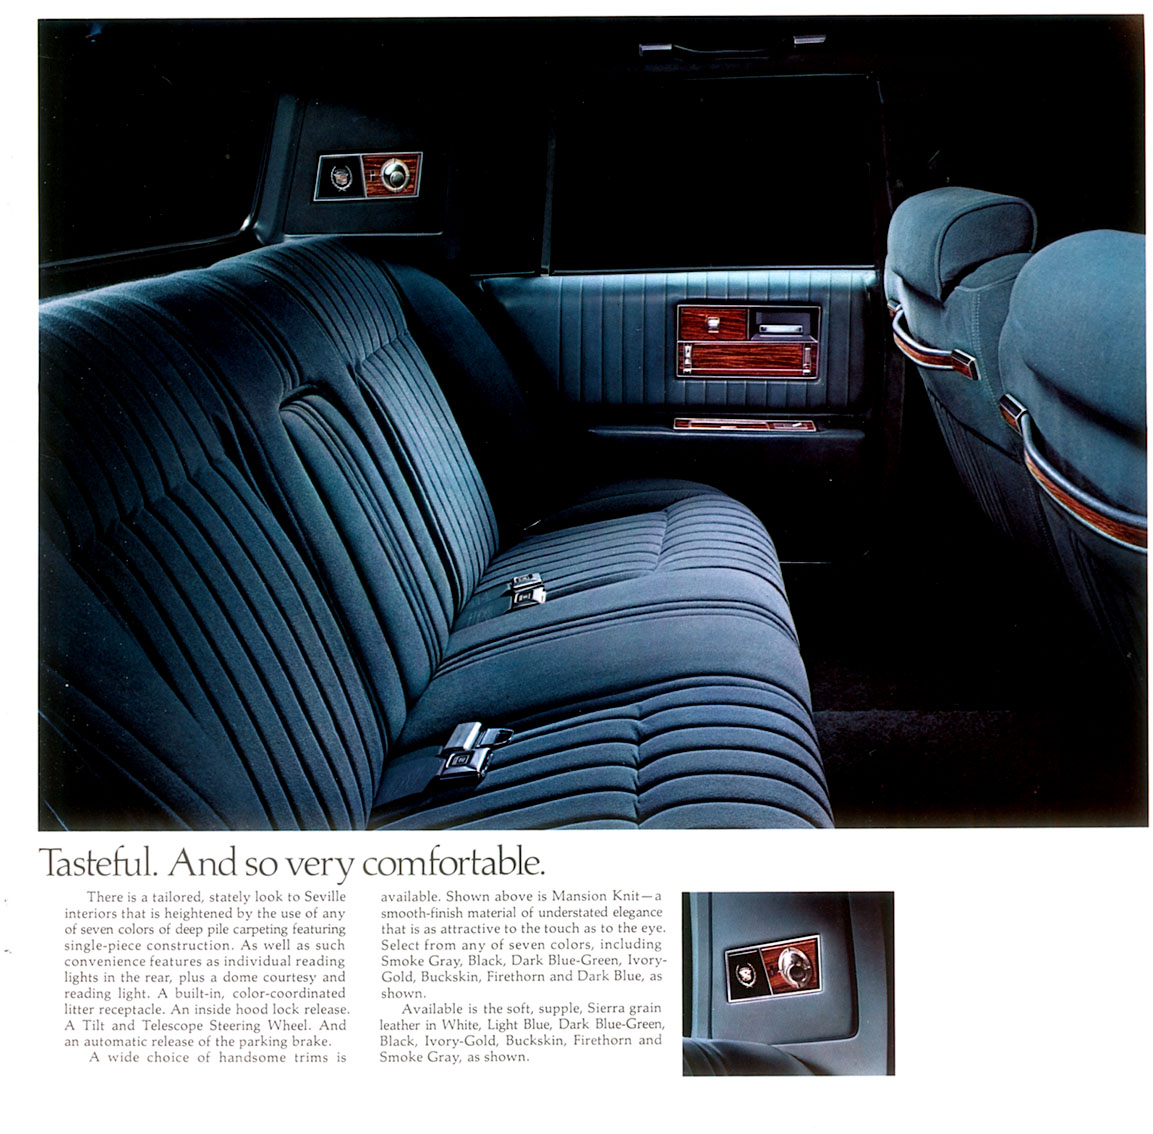 1976 Cadillac Seville Brochure Page 3